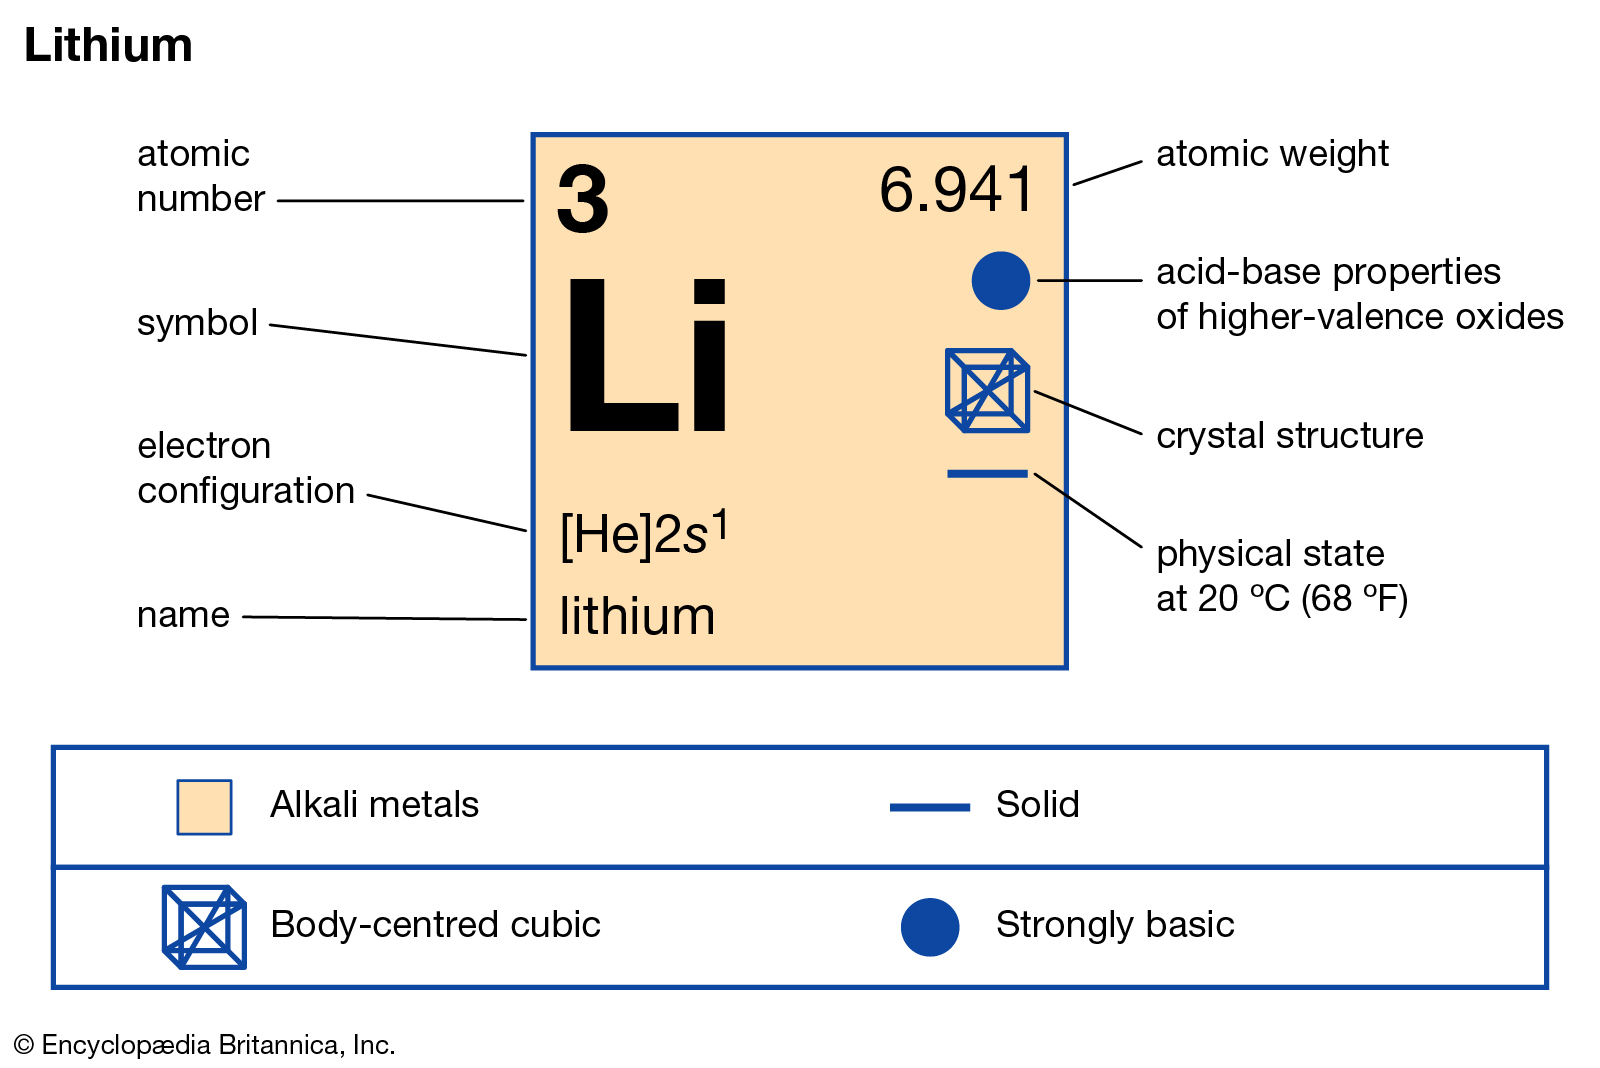 hinh-anh-interesting-facts-about-lithium-34-0